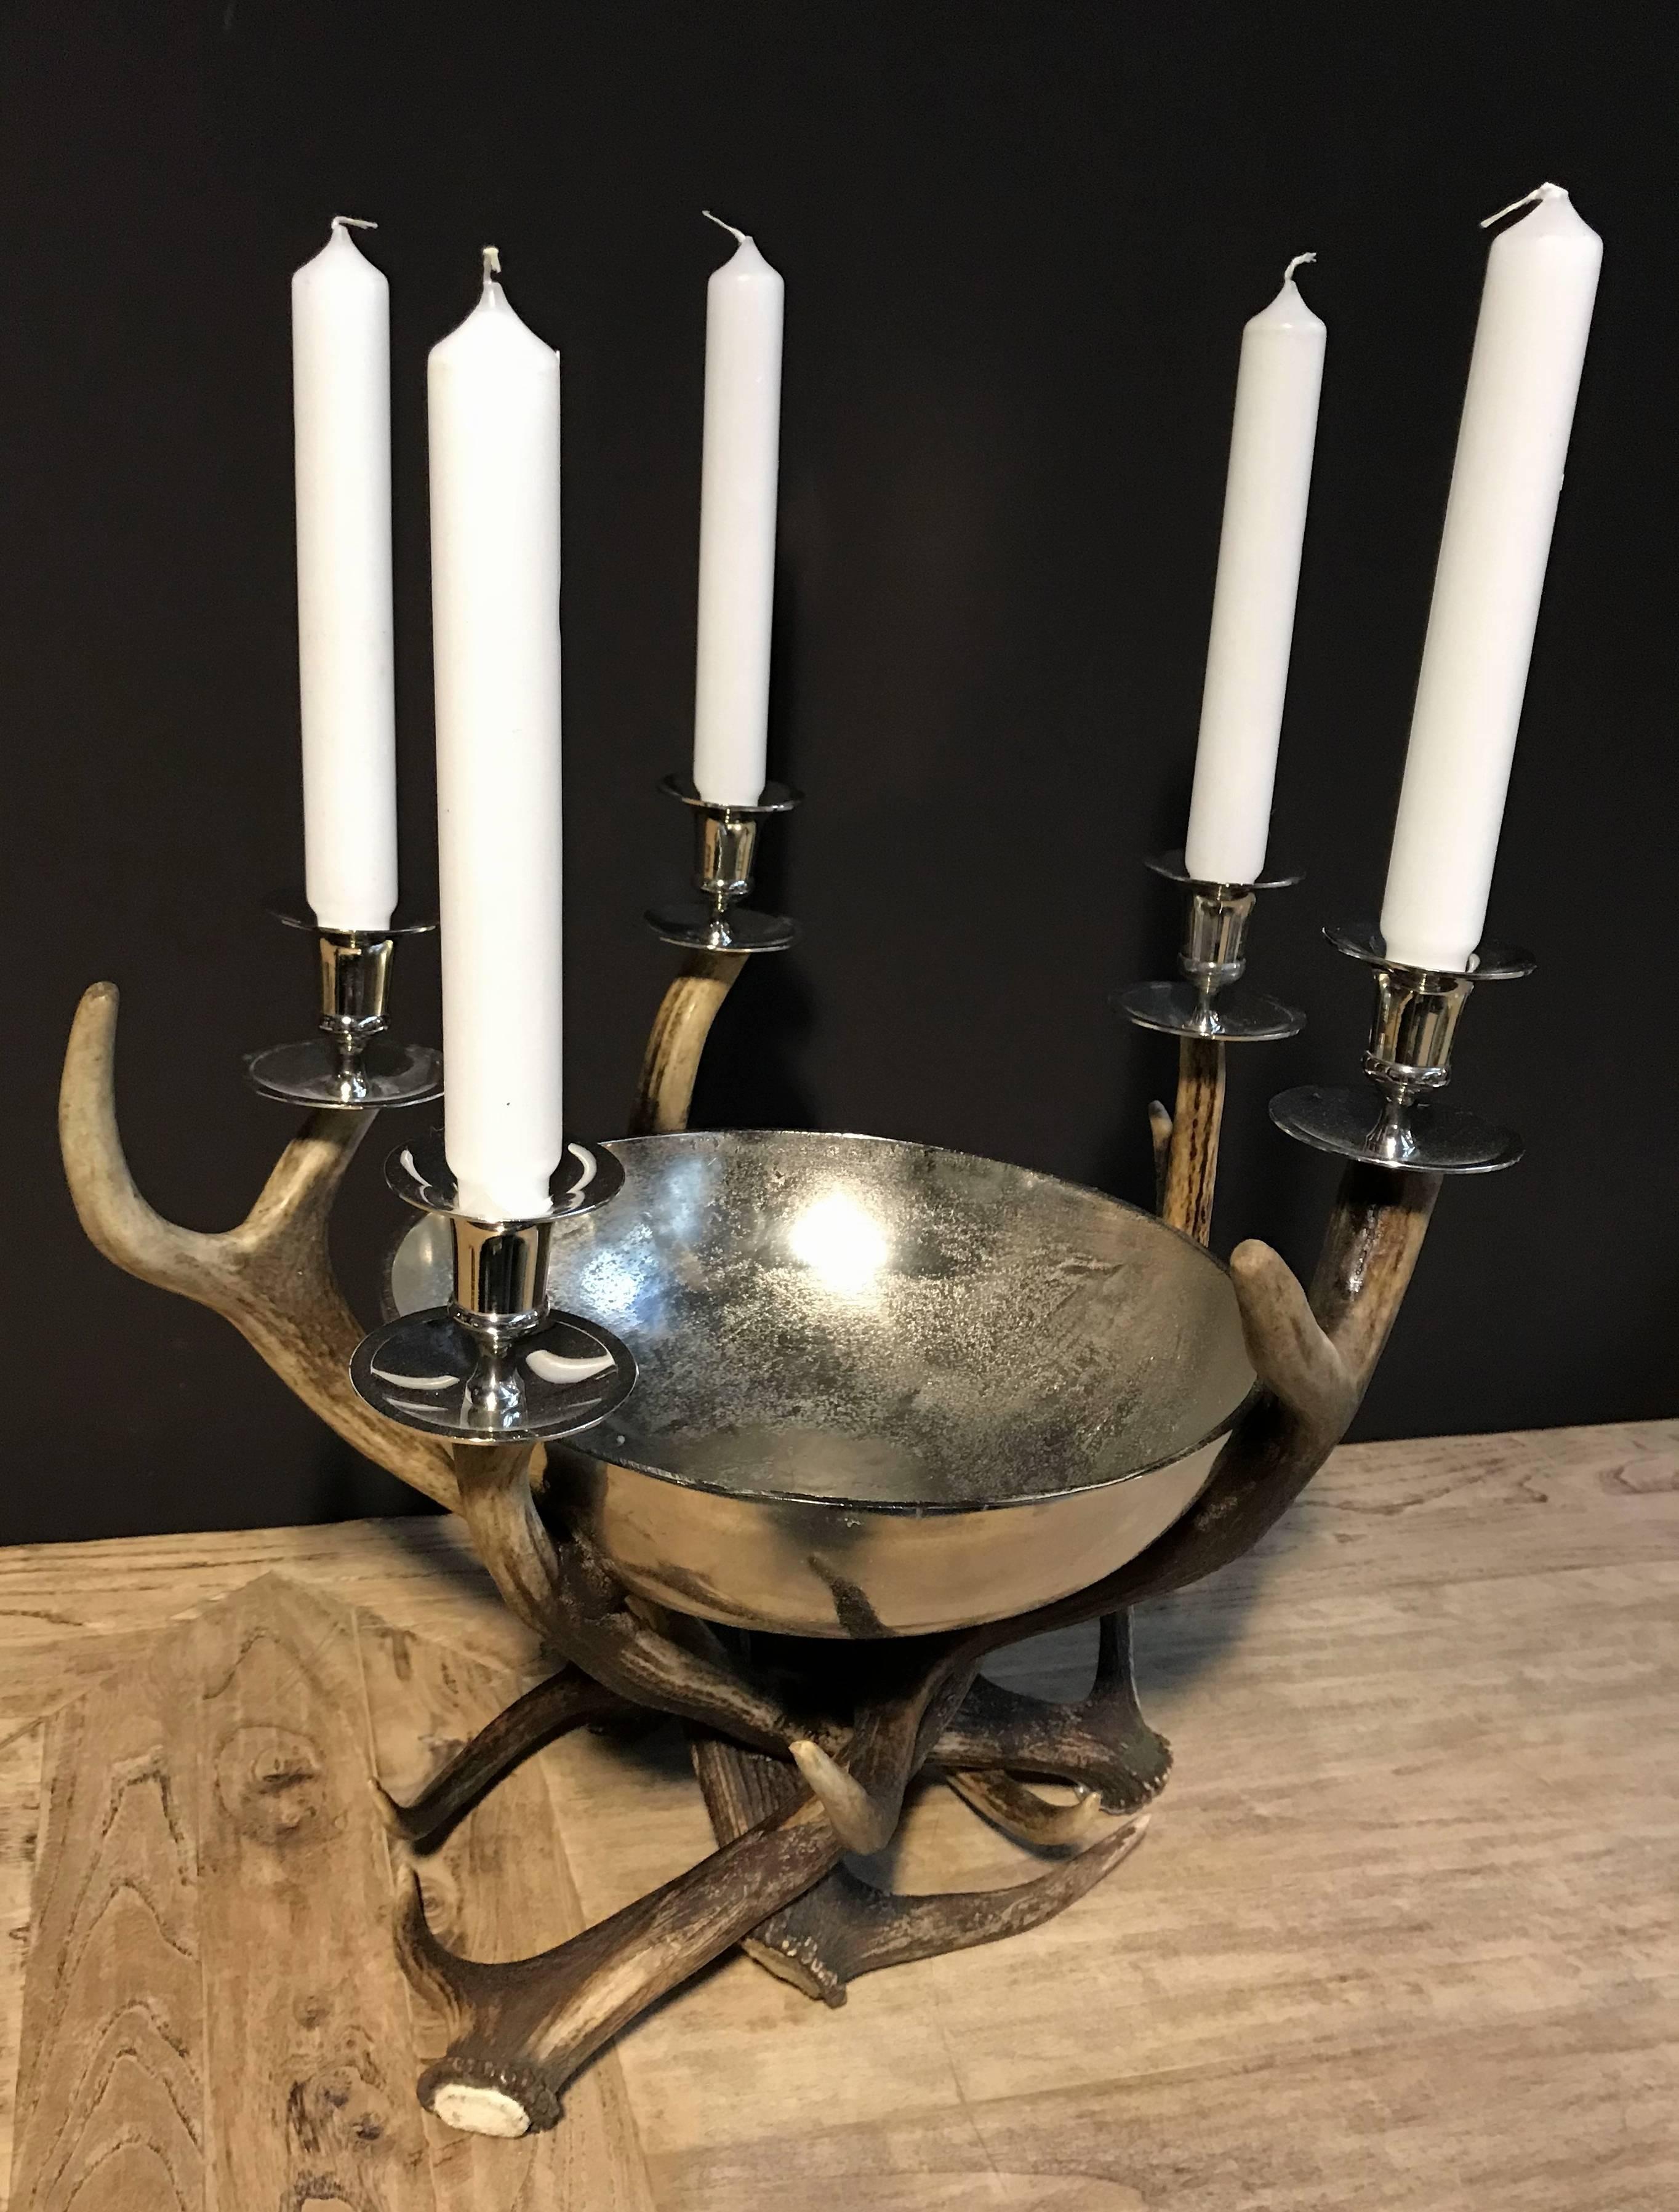 Decorative piece for on a dining table. Made of red deer antlers.